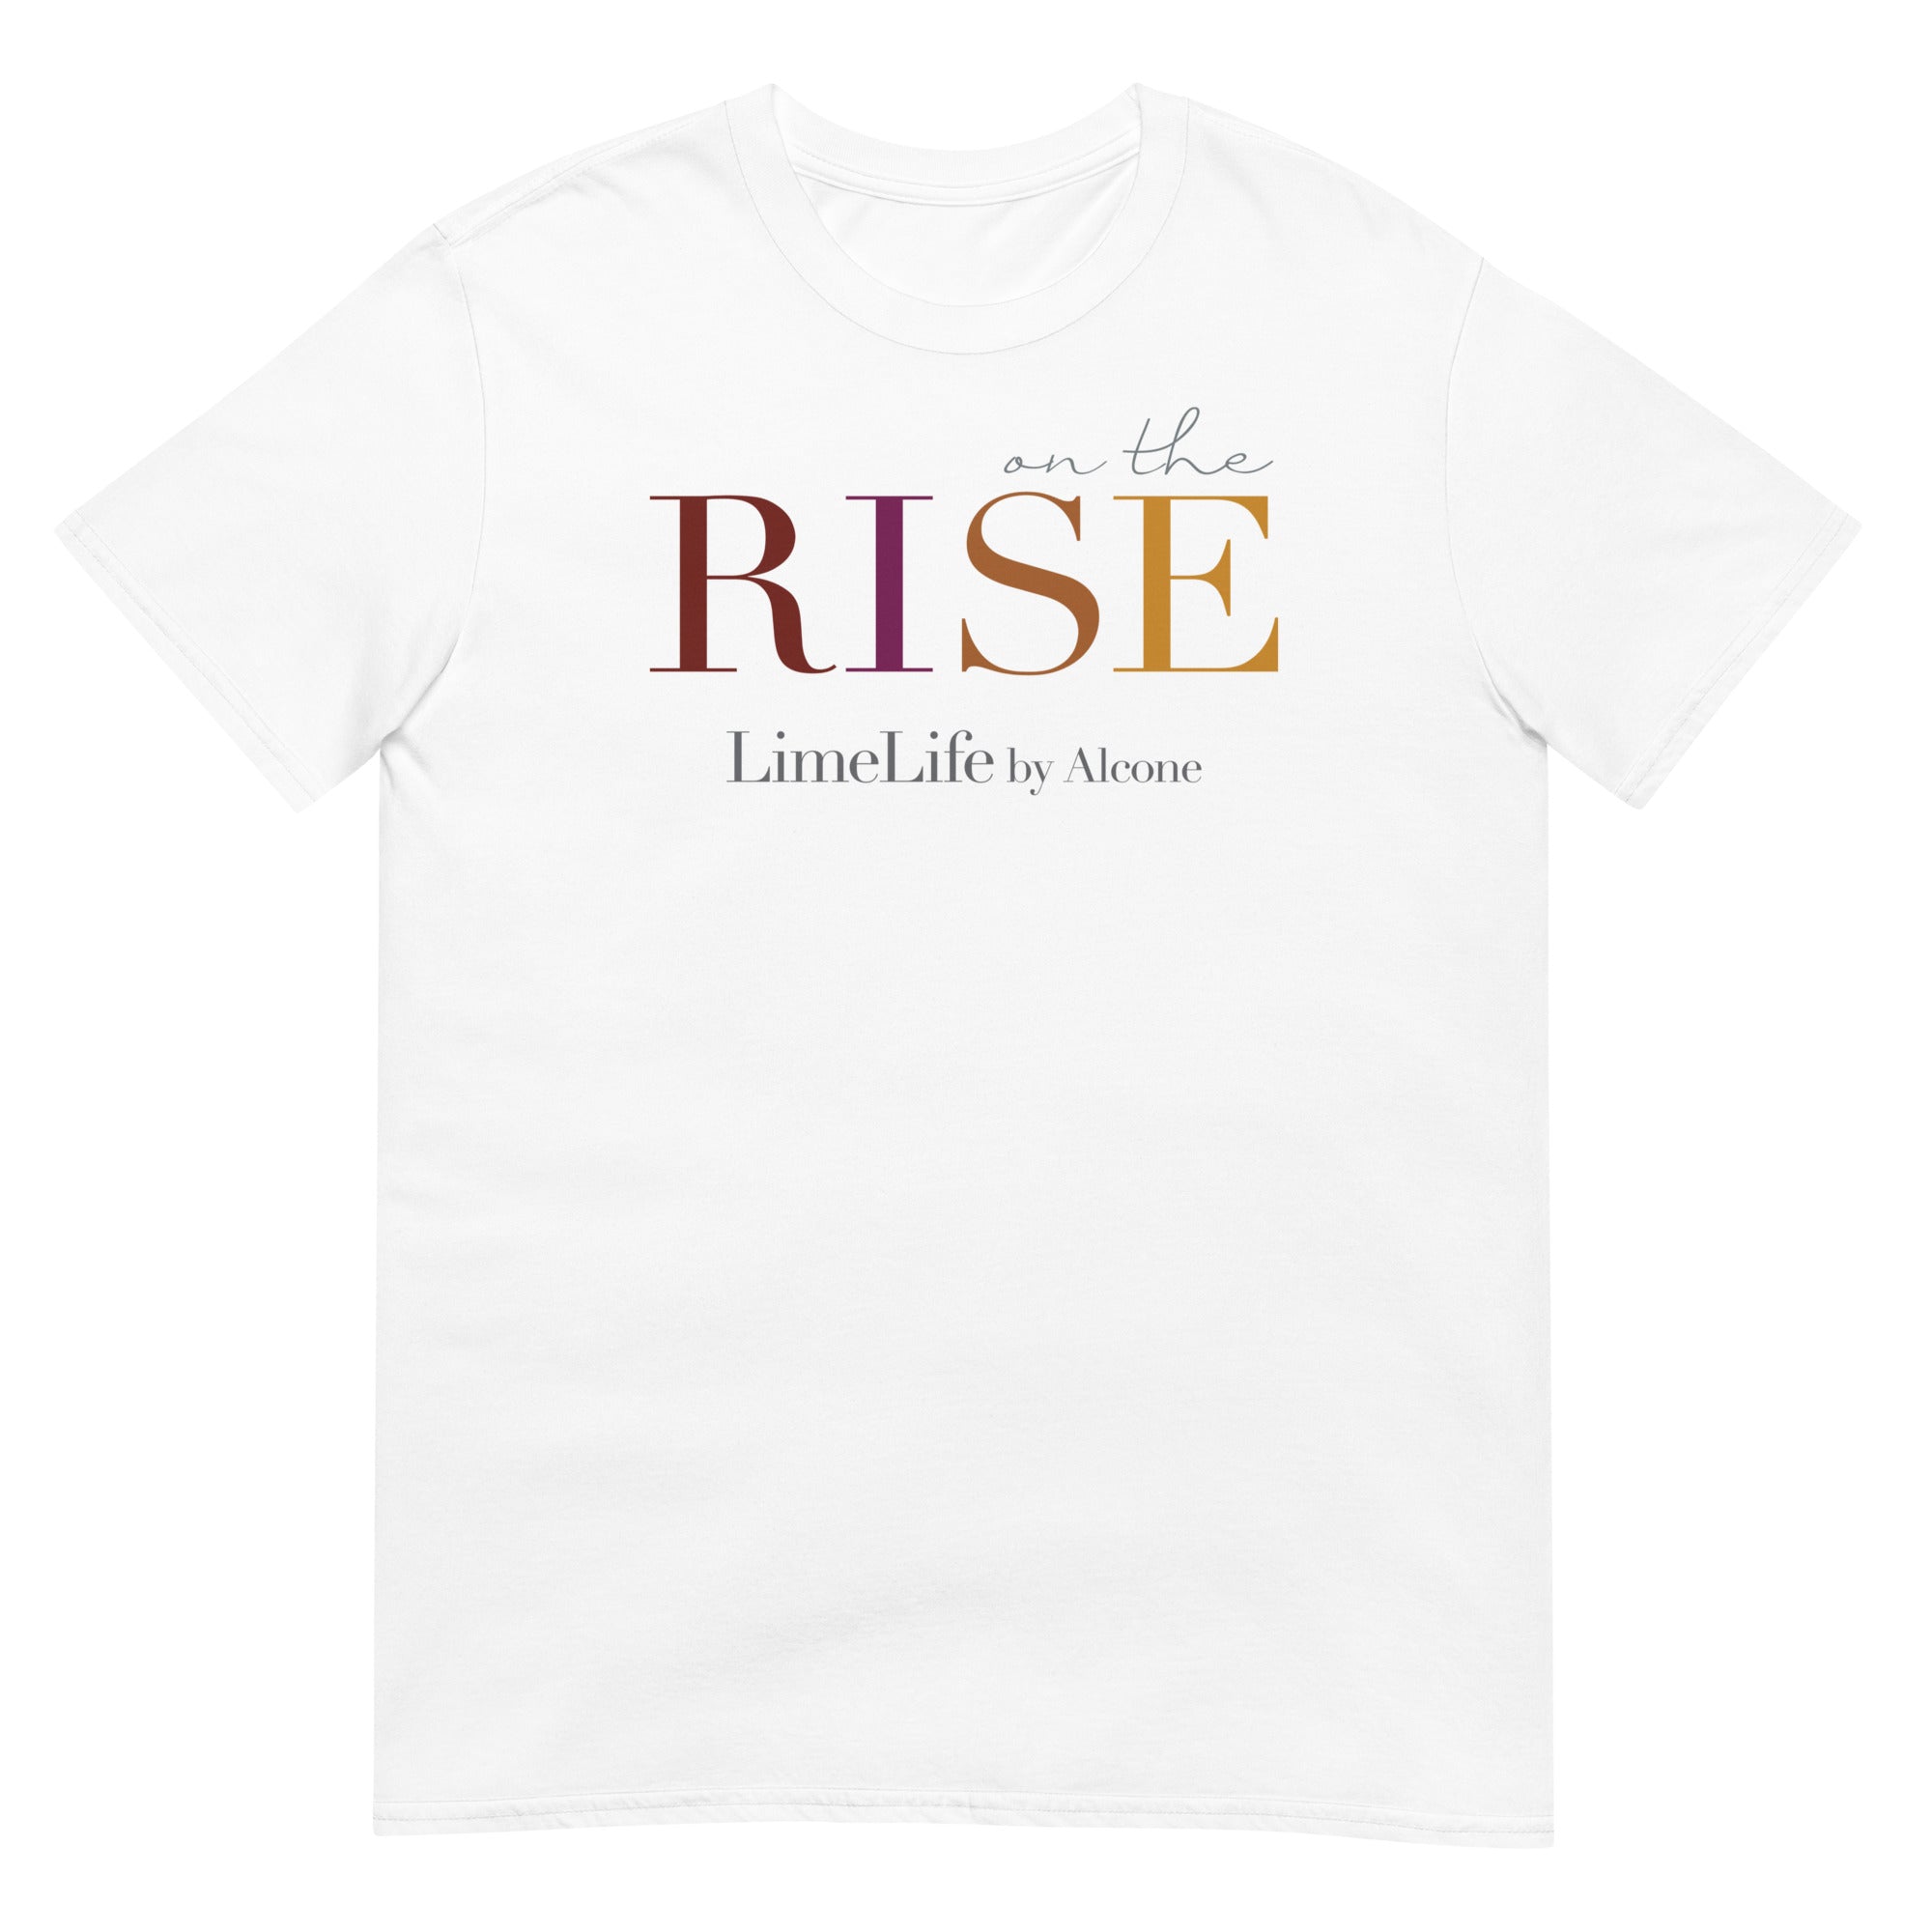 On the Rise - Short-Sleeve Unisex T-Shirt in Black, Dark Heather and White